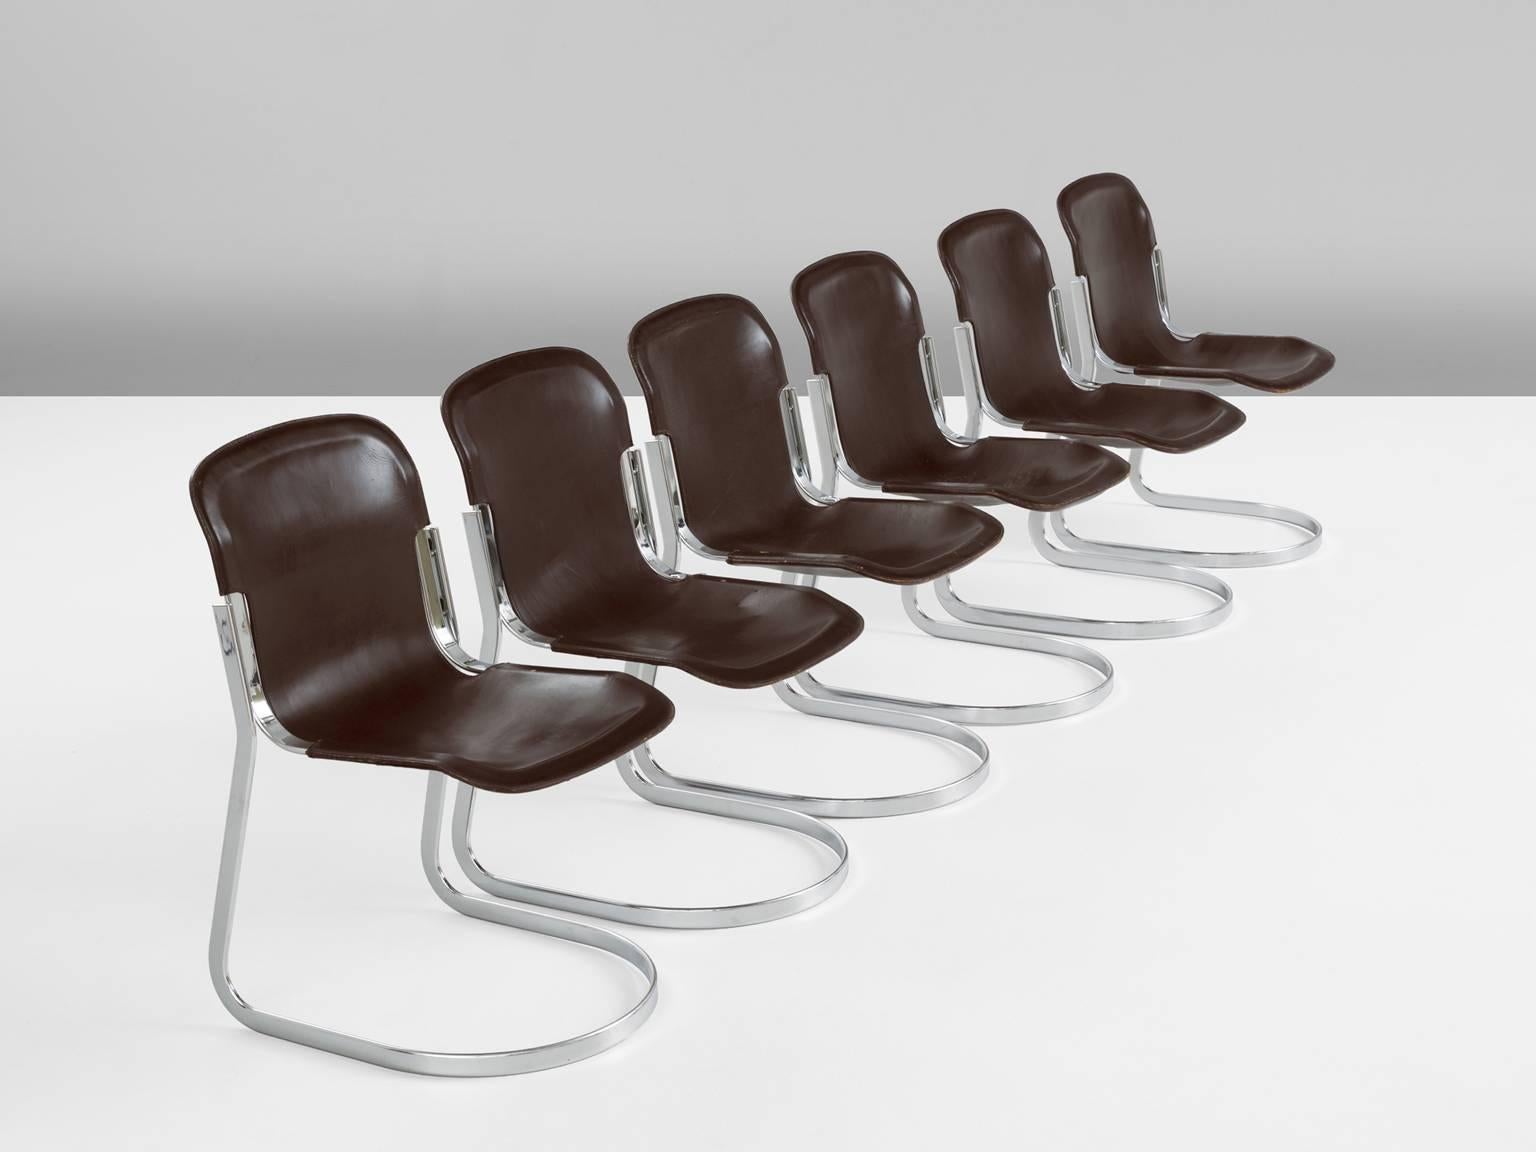 Set of six chairs, in chrome and leather, by Cidue, Italy 1970s. 

Cantilevered dining room chairs with chromed flat tubular steel frame. The seating and back are from thick brown colored saddle leather. The dark leather shows a nice all-over